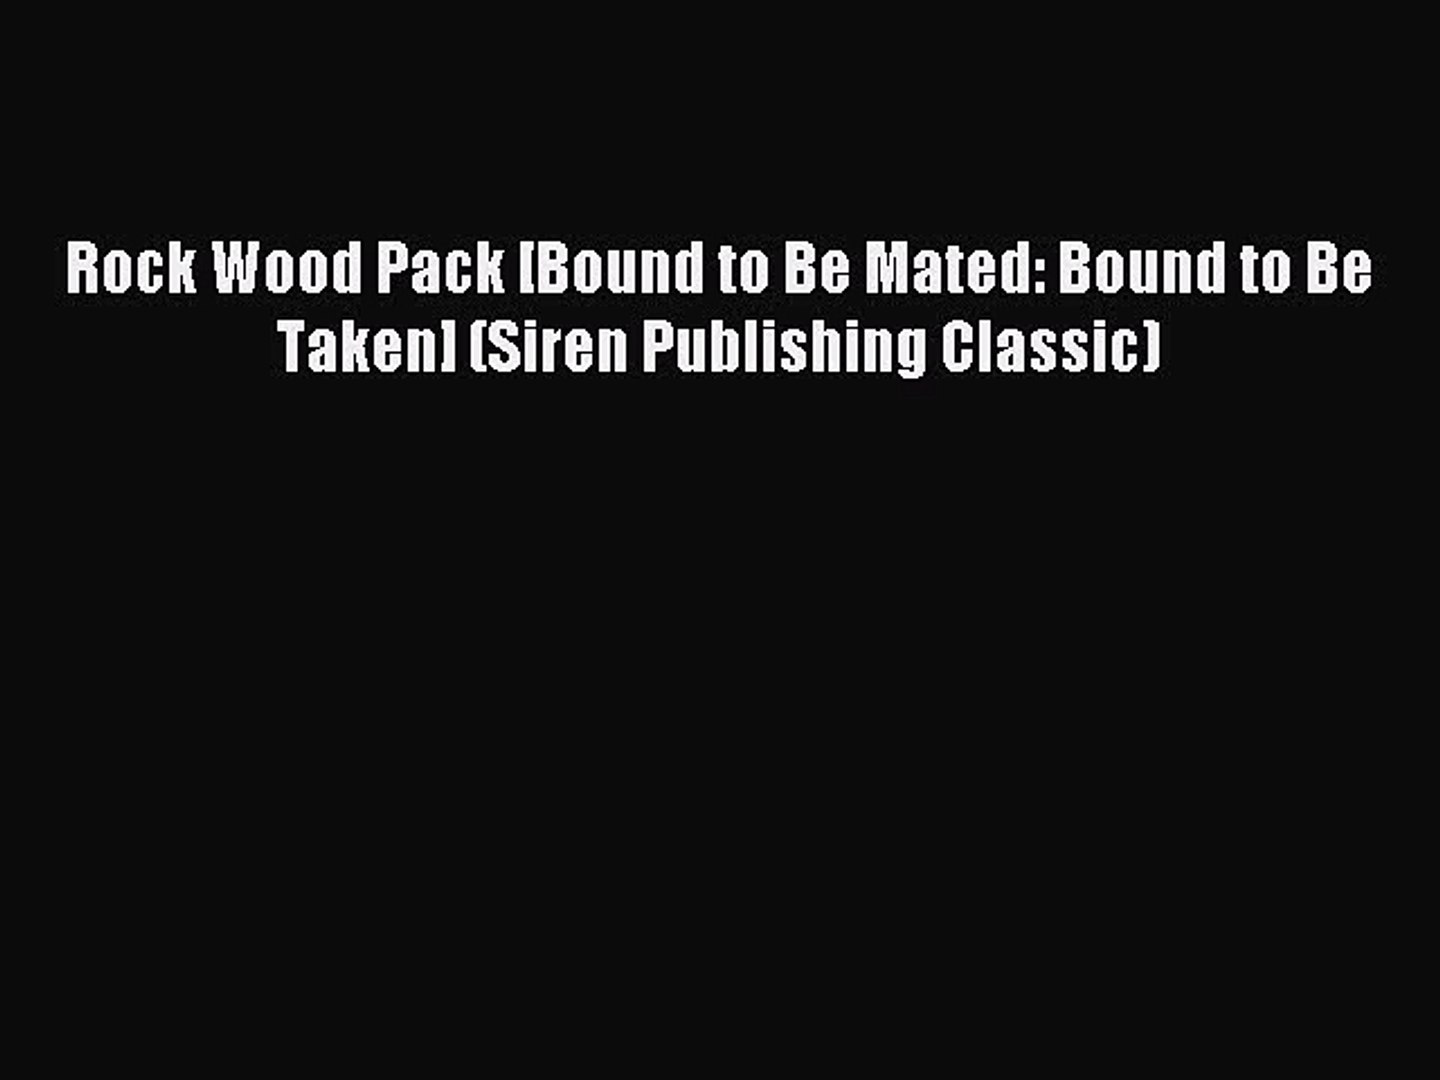 Download Rock Wood Pack [Bound to Be Mated: Bound to Be Taken] (Siren Publishing Classic) PDF